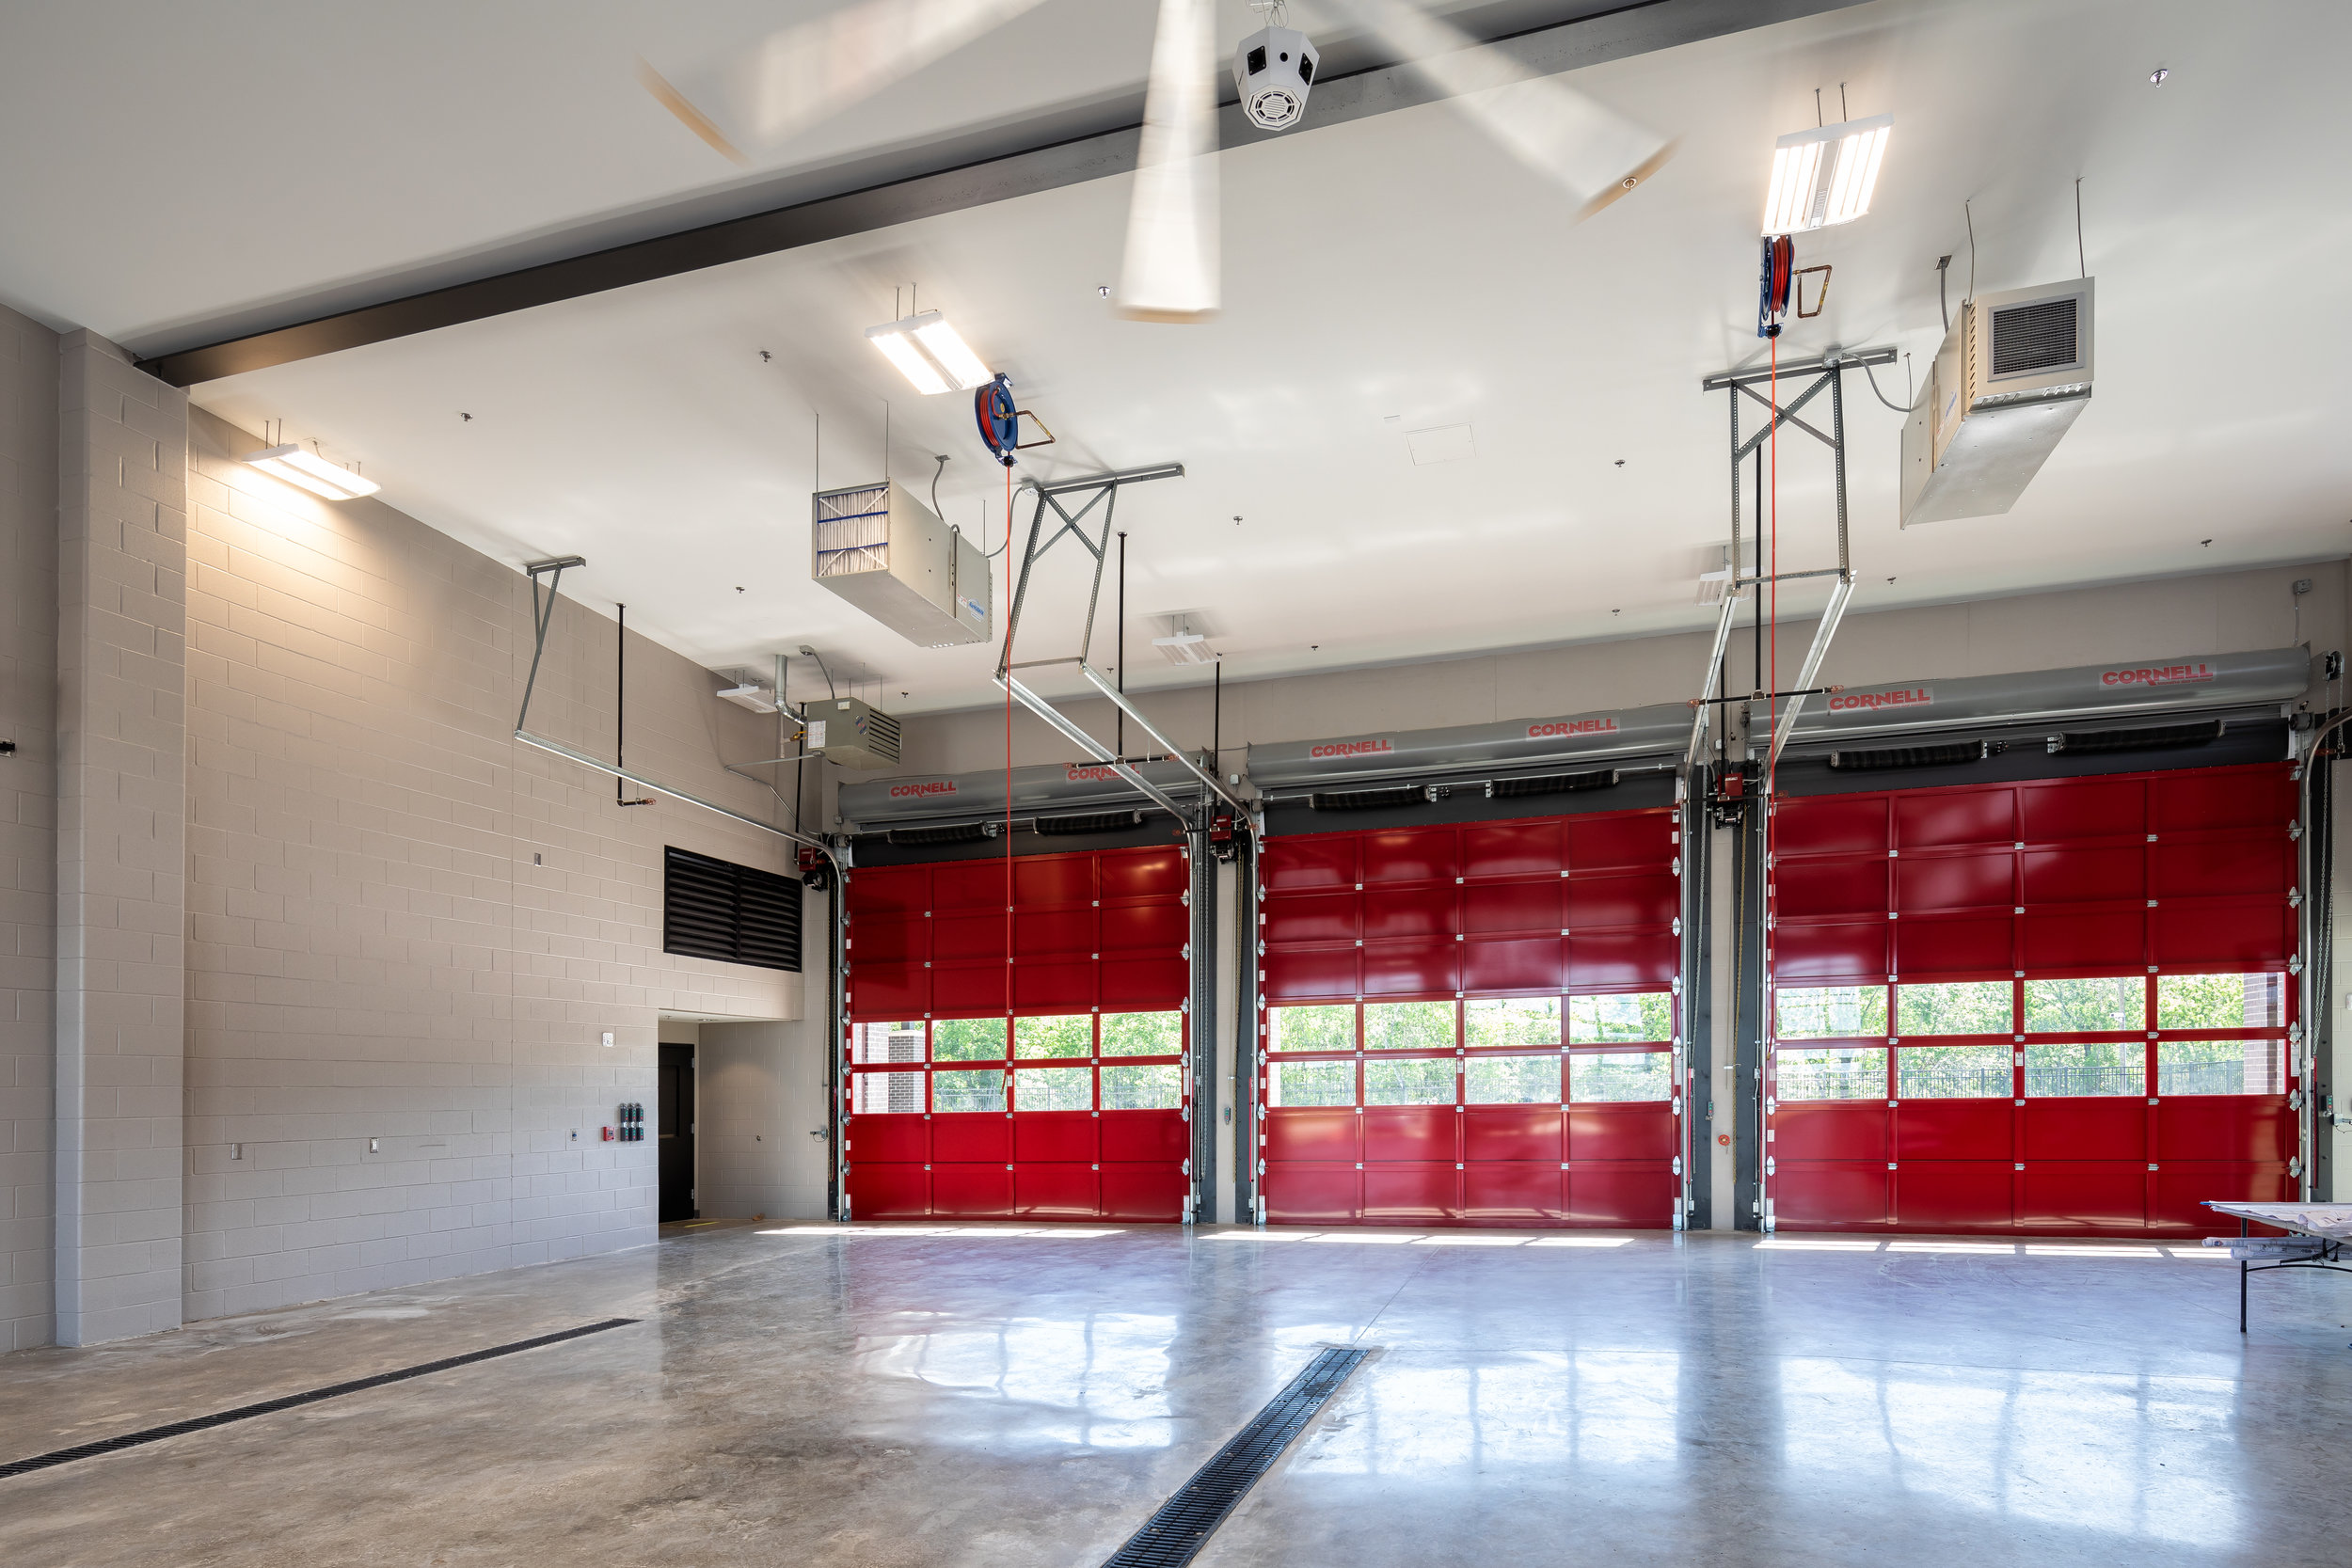 City of Pearland Fire Station No.1